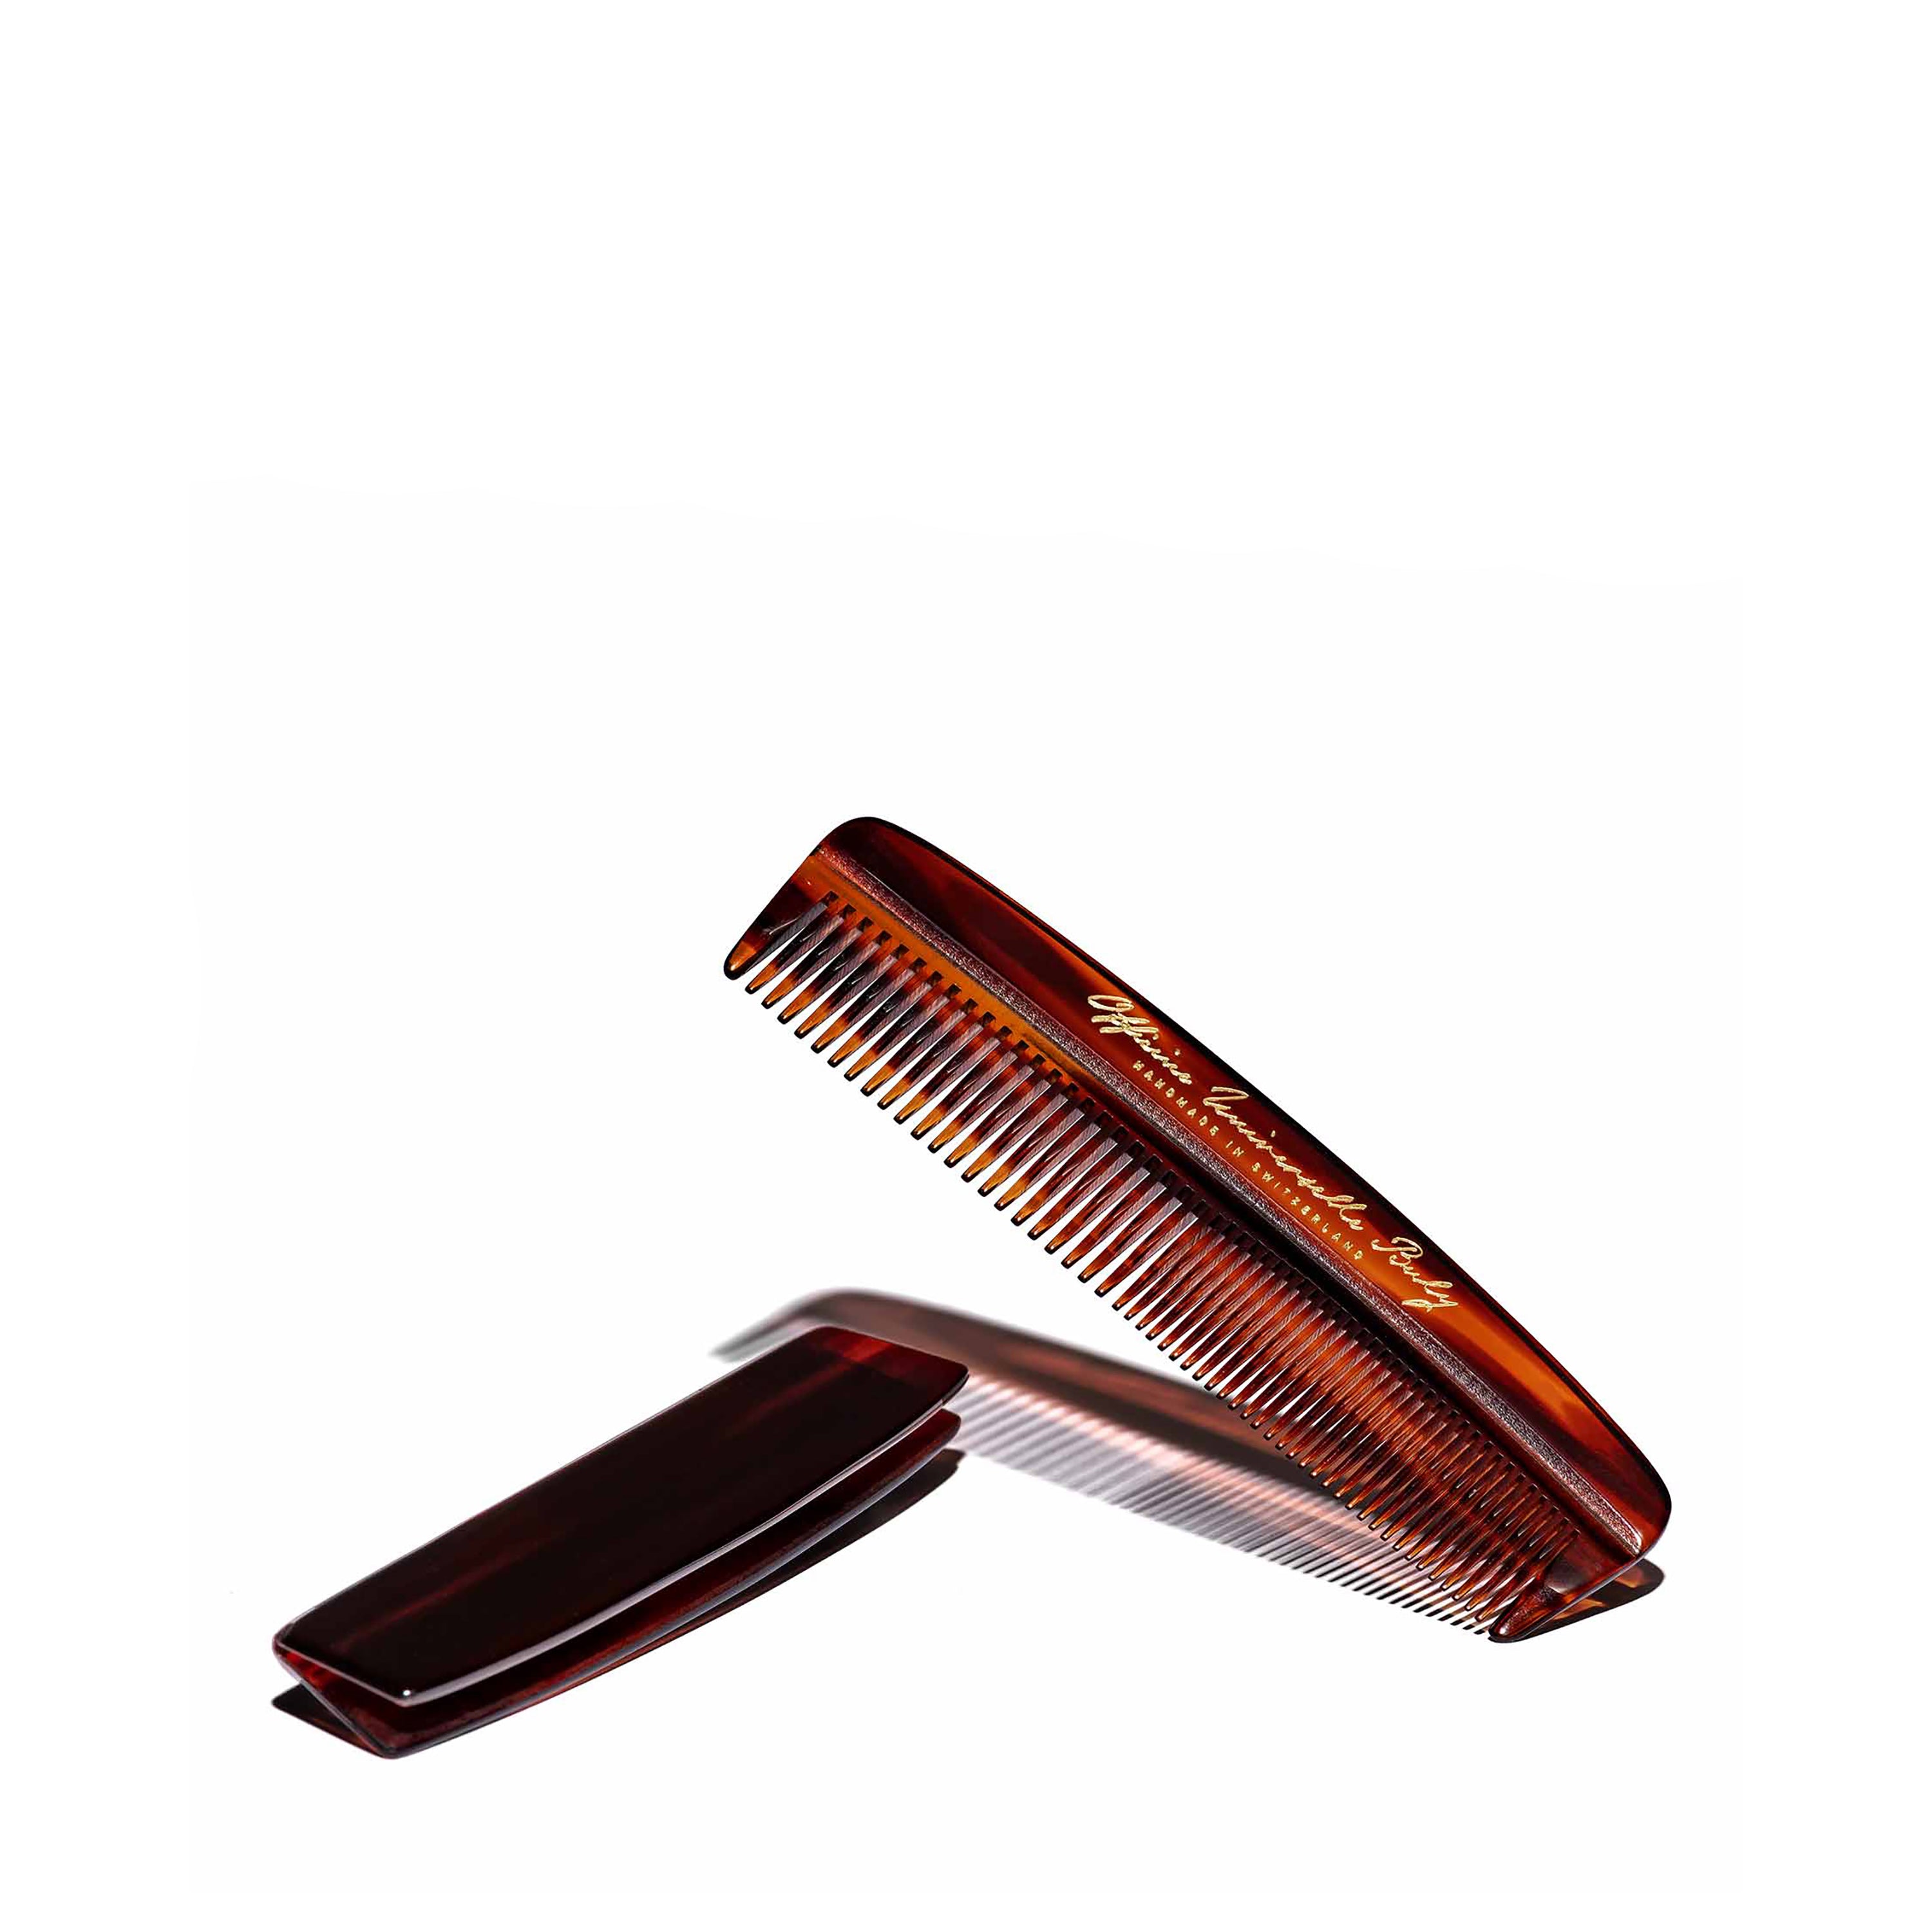 Buly 1803 - Horn-Effect Acetate Folding Comb - Red Buly 1803